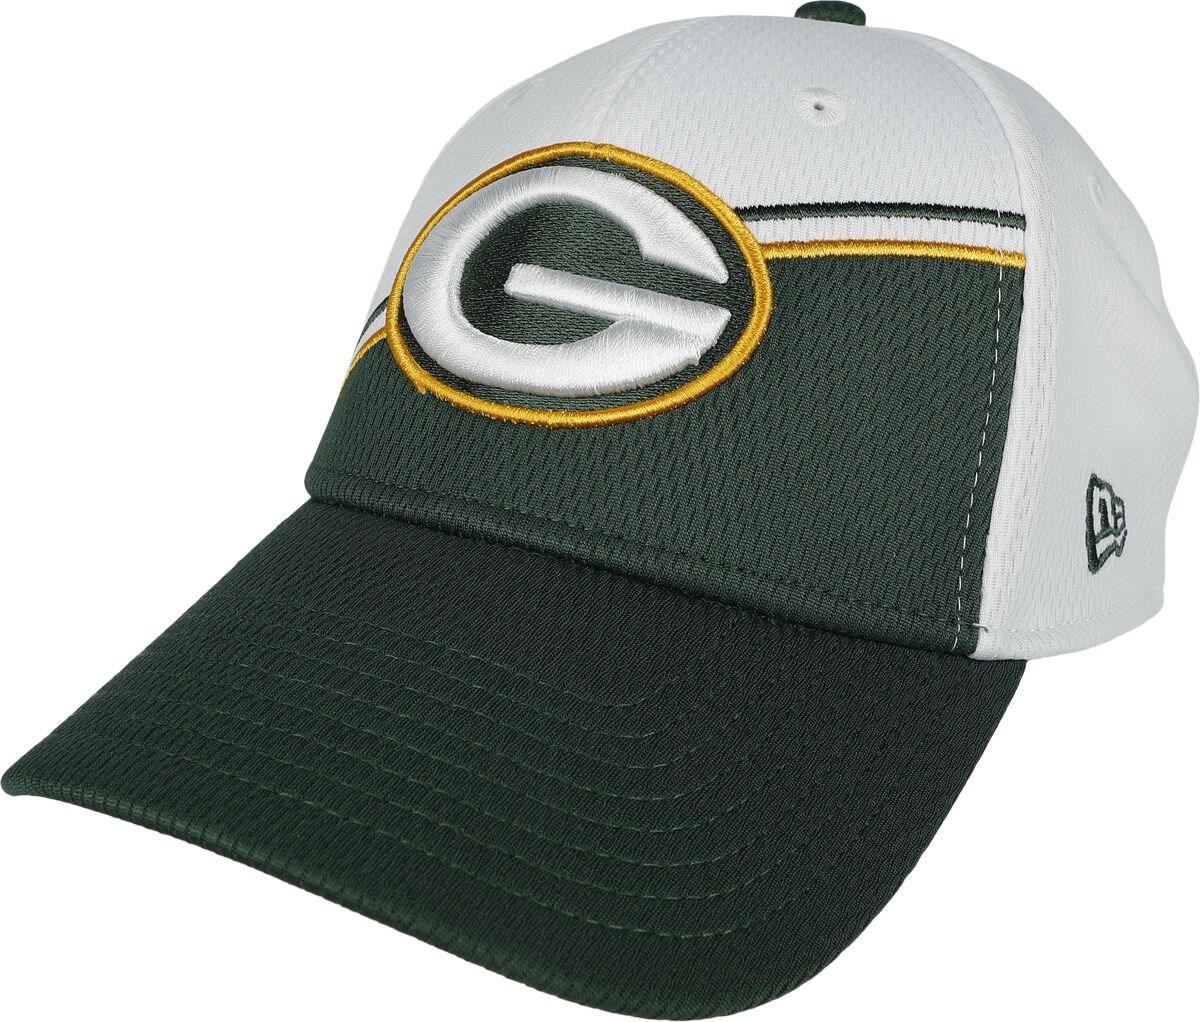 New Era - NFL 9FORTY Green Bay Packers Sideline Cap multicolor